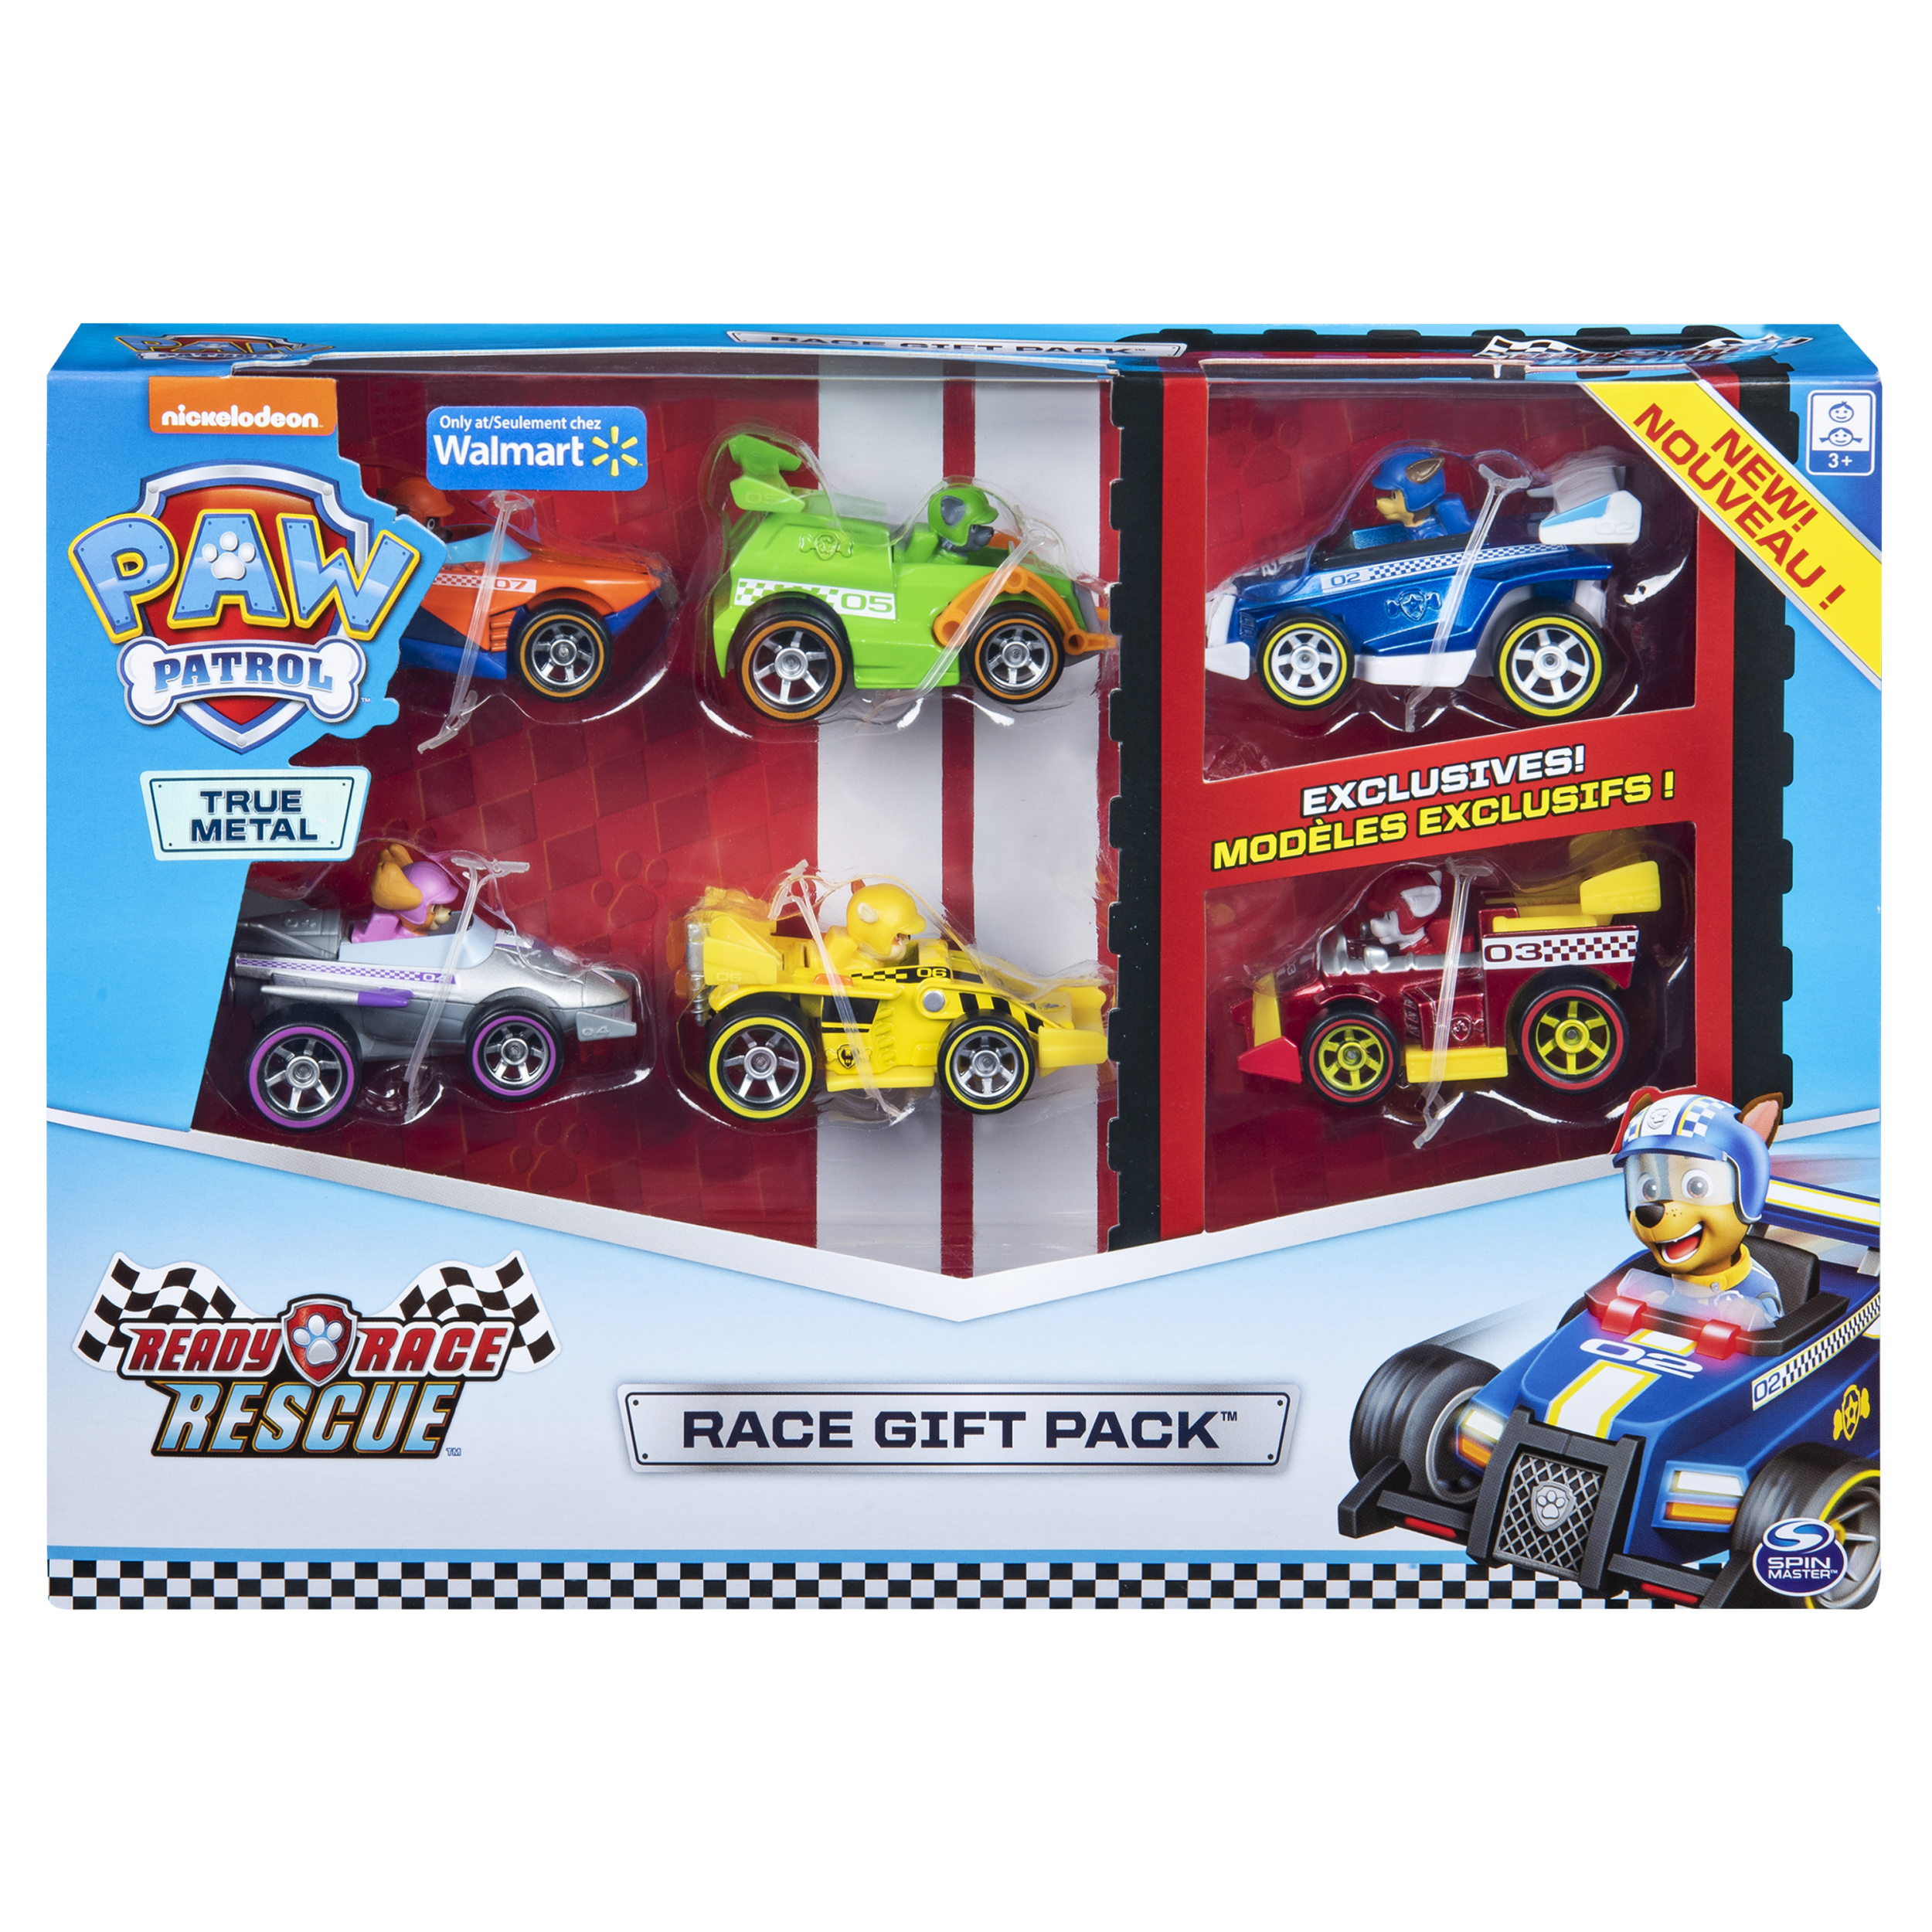 PAW Patrol, True Metal Ready Race Rescue Gift Pack of 6 Race Car Collectible Die-Cast Vehicles, 1:55 Scale - image 1 of 5